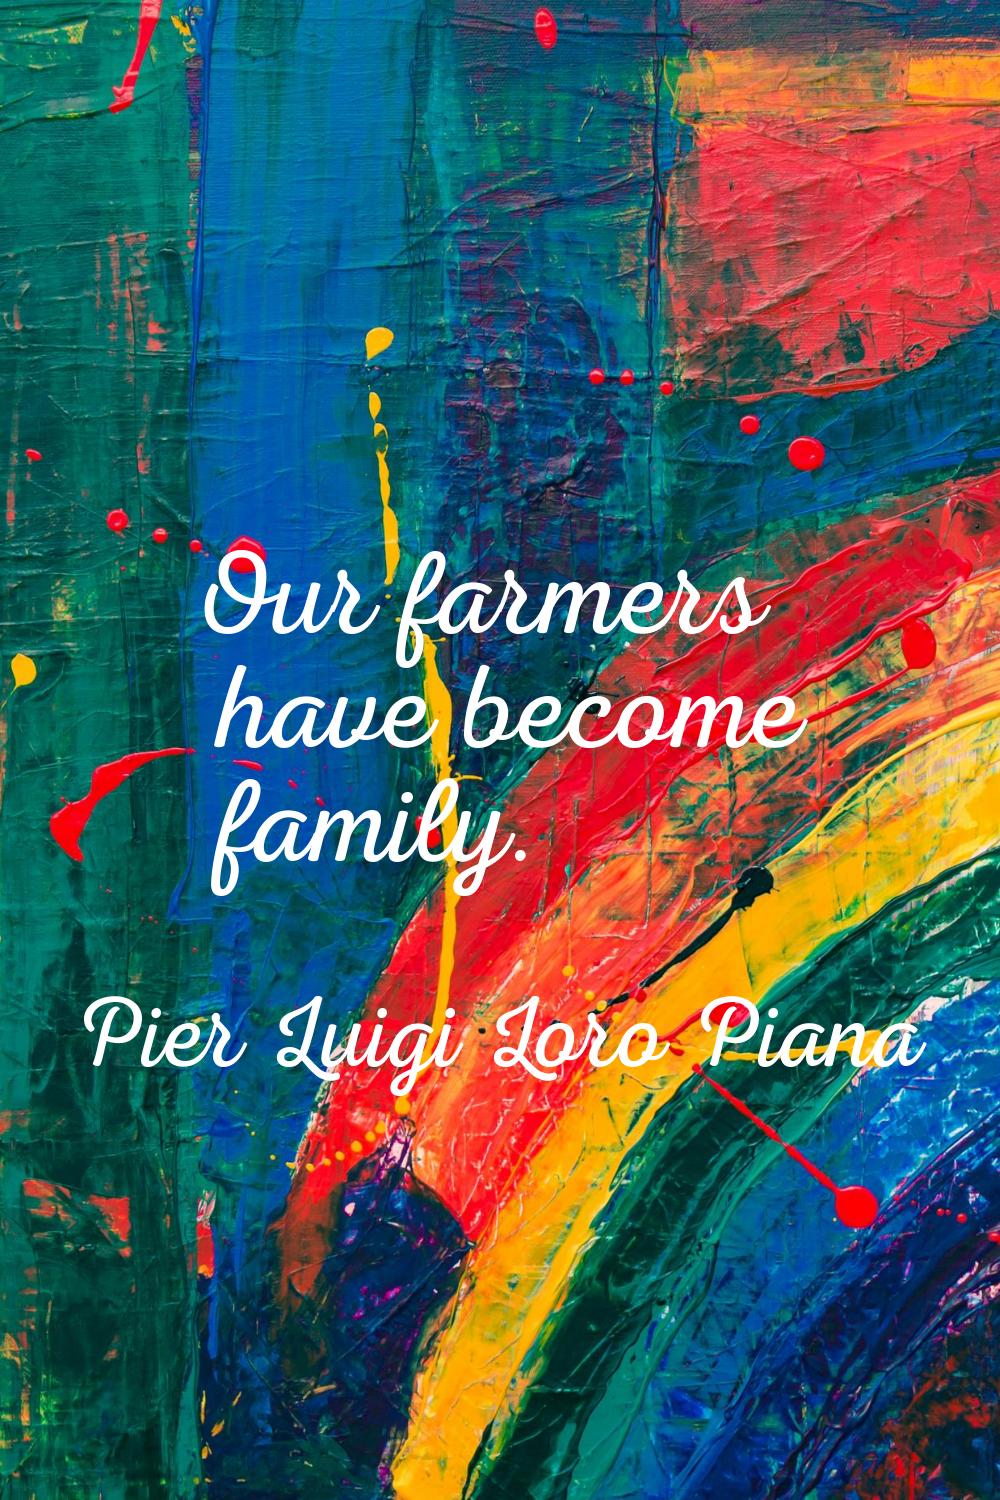 Our farmers have become family.